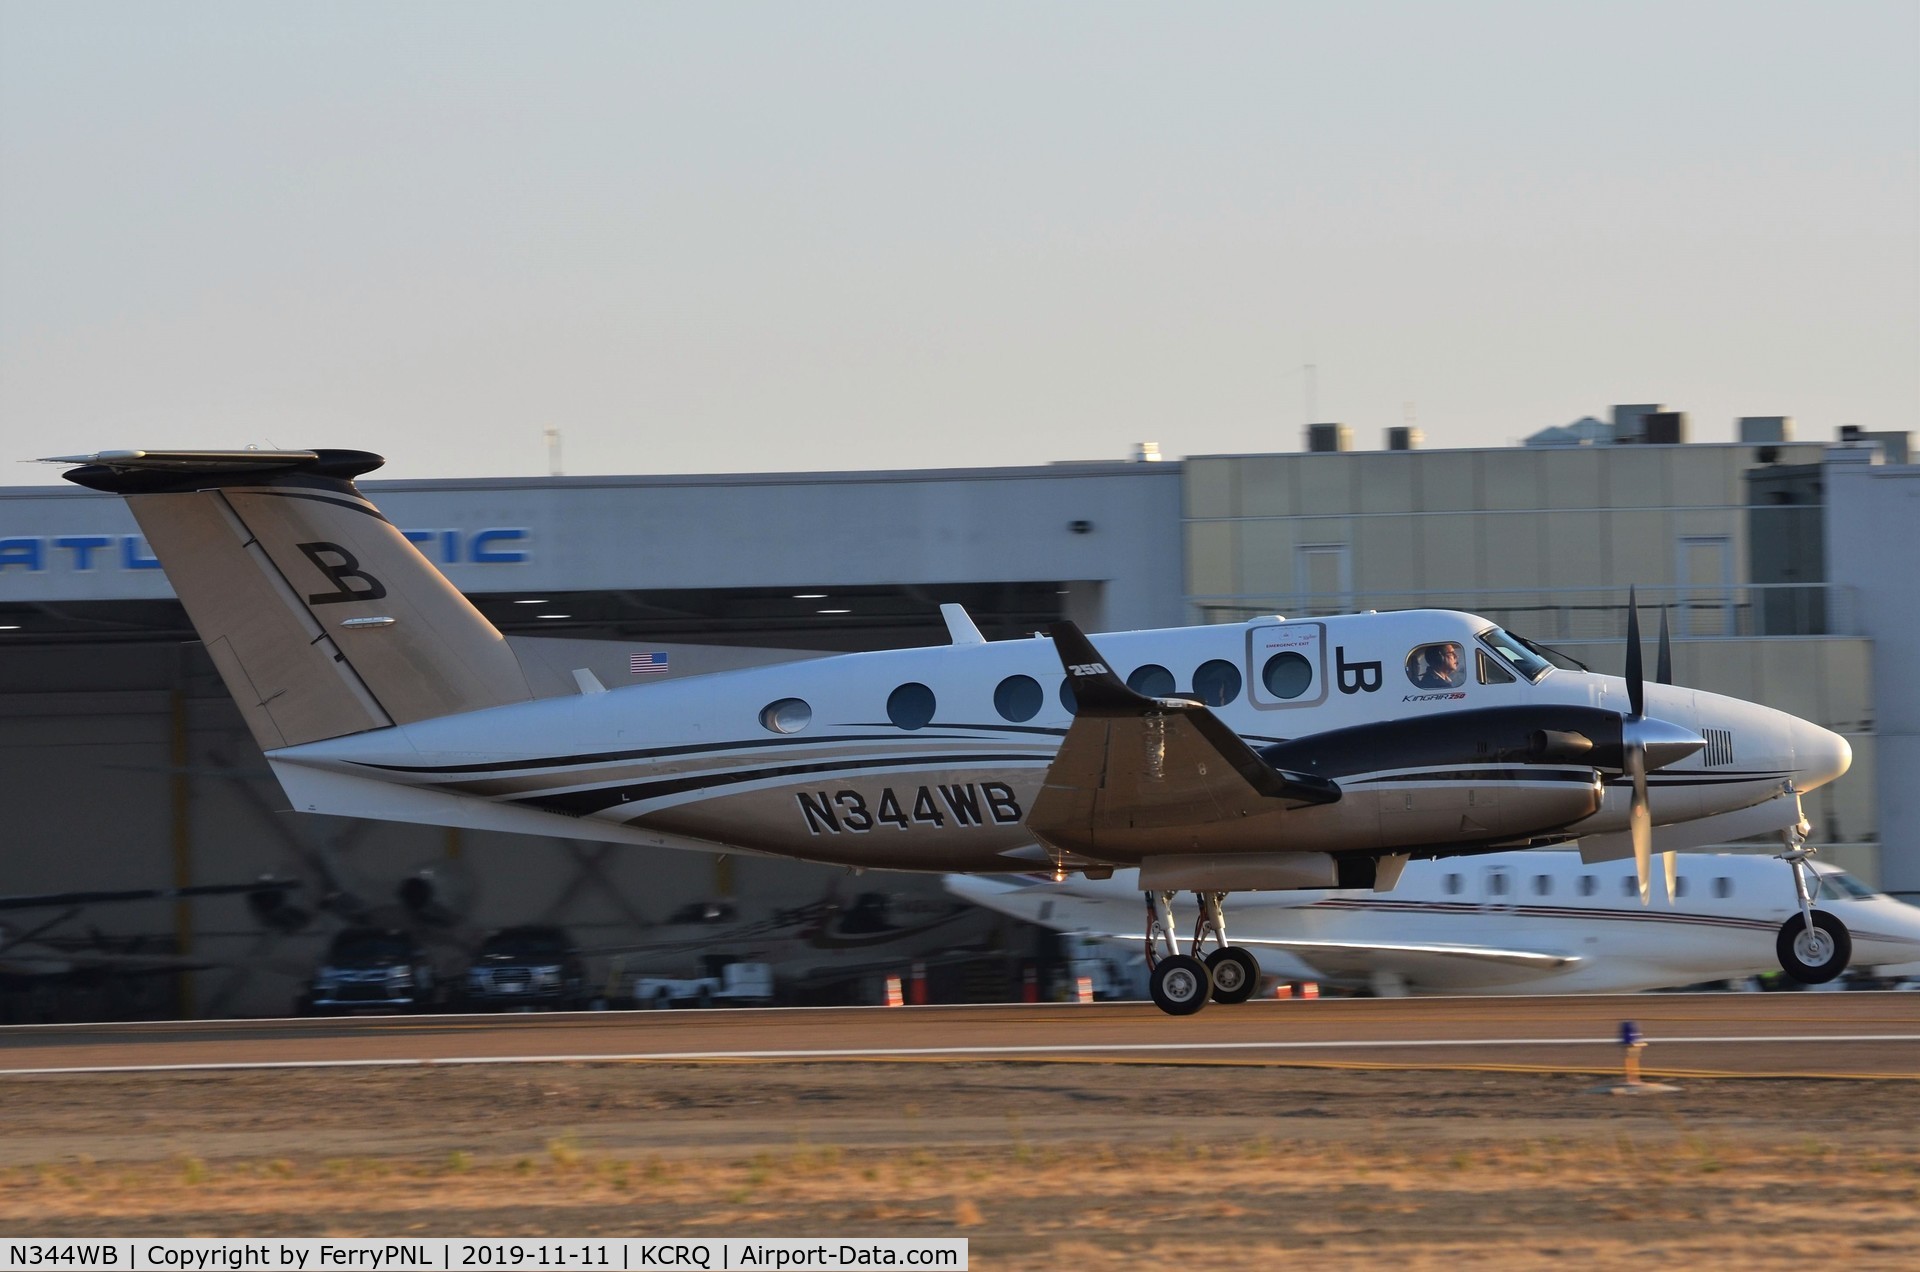 N344WB, 2014 Beechcraft B200GT C/N BY-222, Brandt Transport LLC Be250 about to touch-down in KCRQ